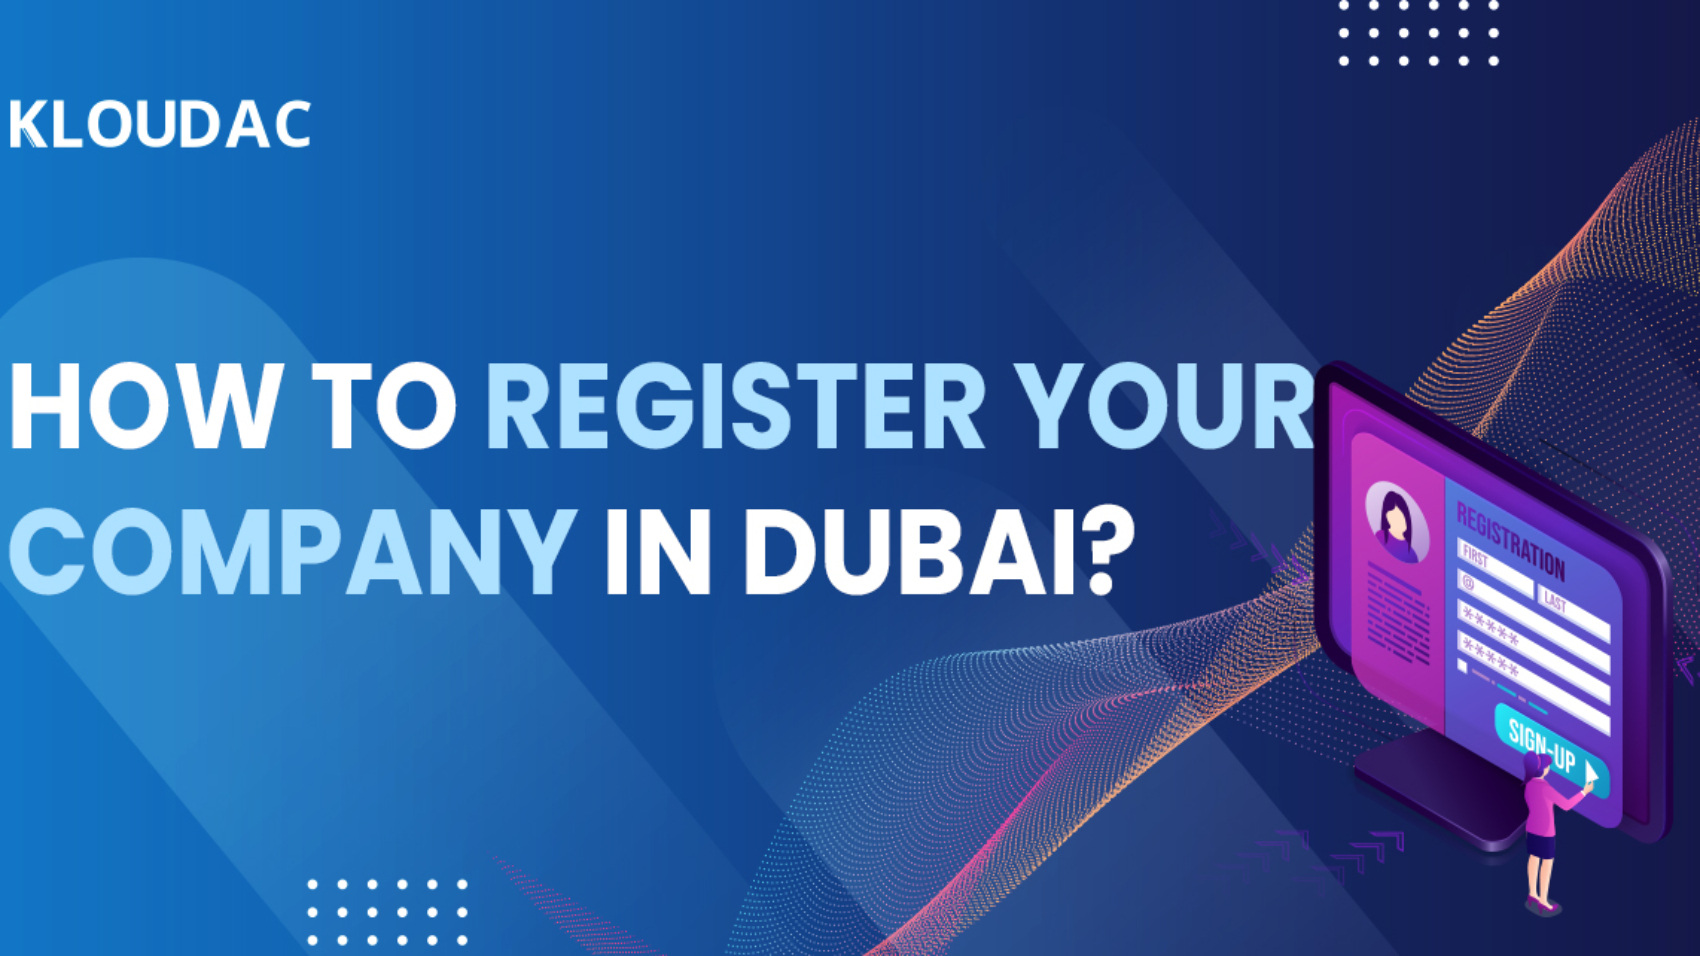 How to register your company in Dubai?